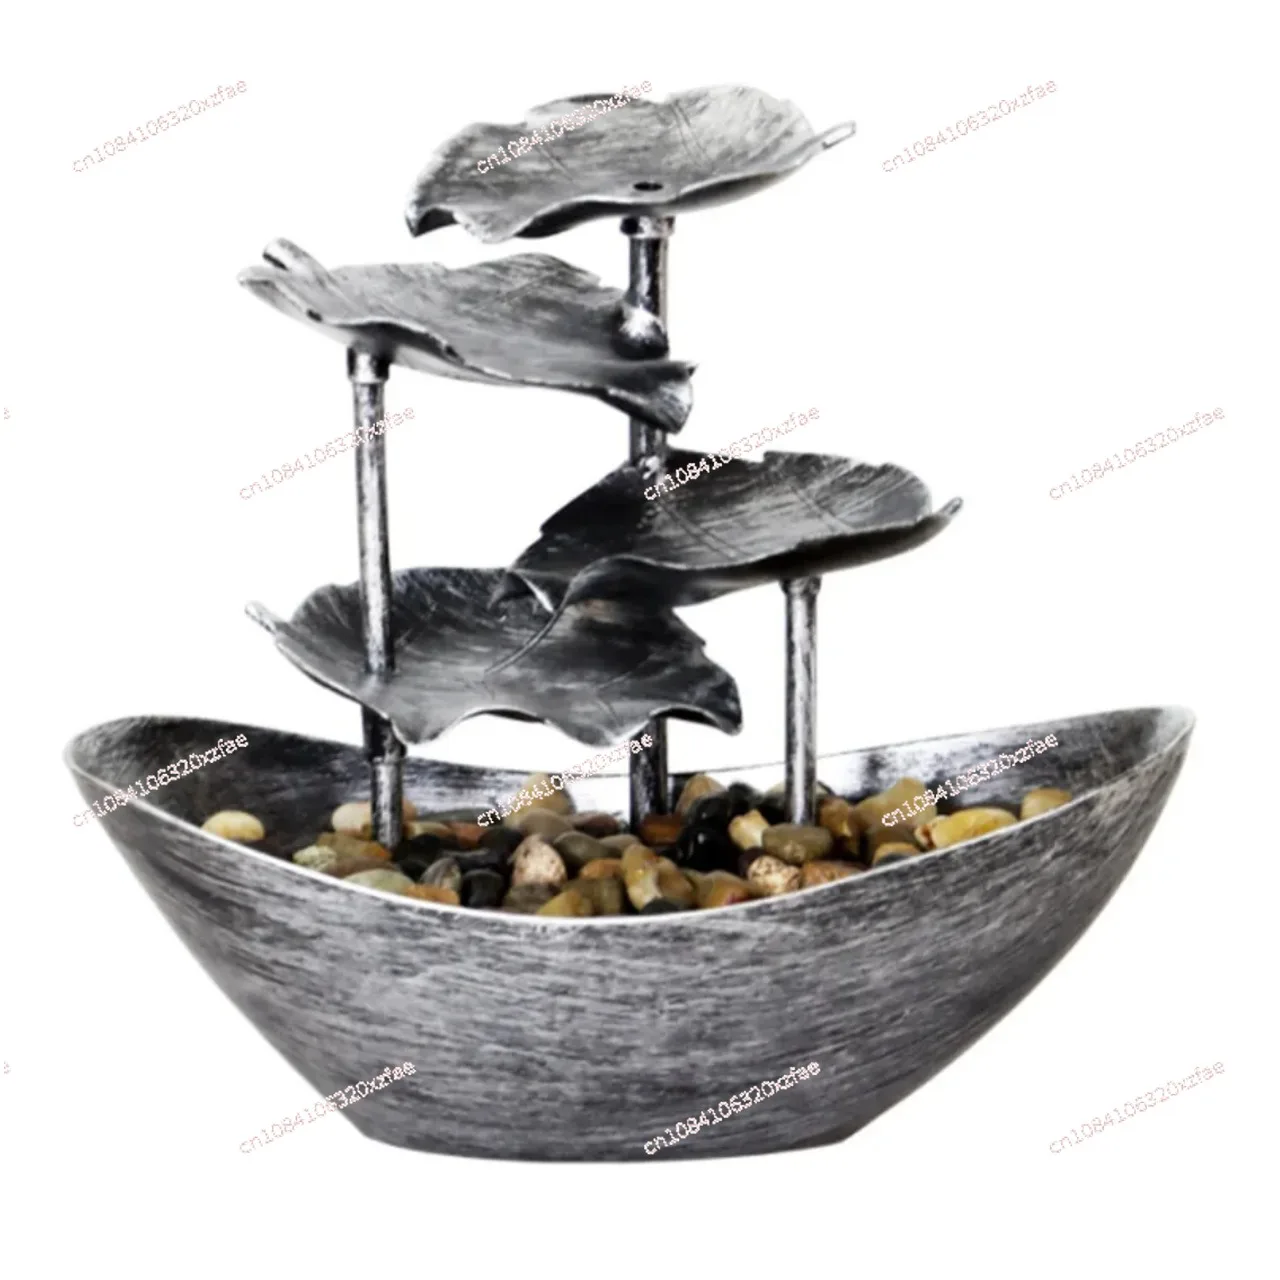 

LED Lights Desktop Fountain Mini Waterfall Indoor Tabletop Fountain Water Feature with 28 X 15 X 25CM Tabletop Water Fountain